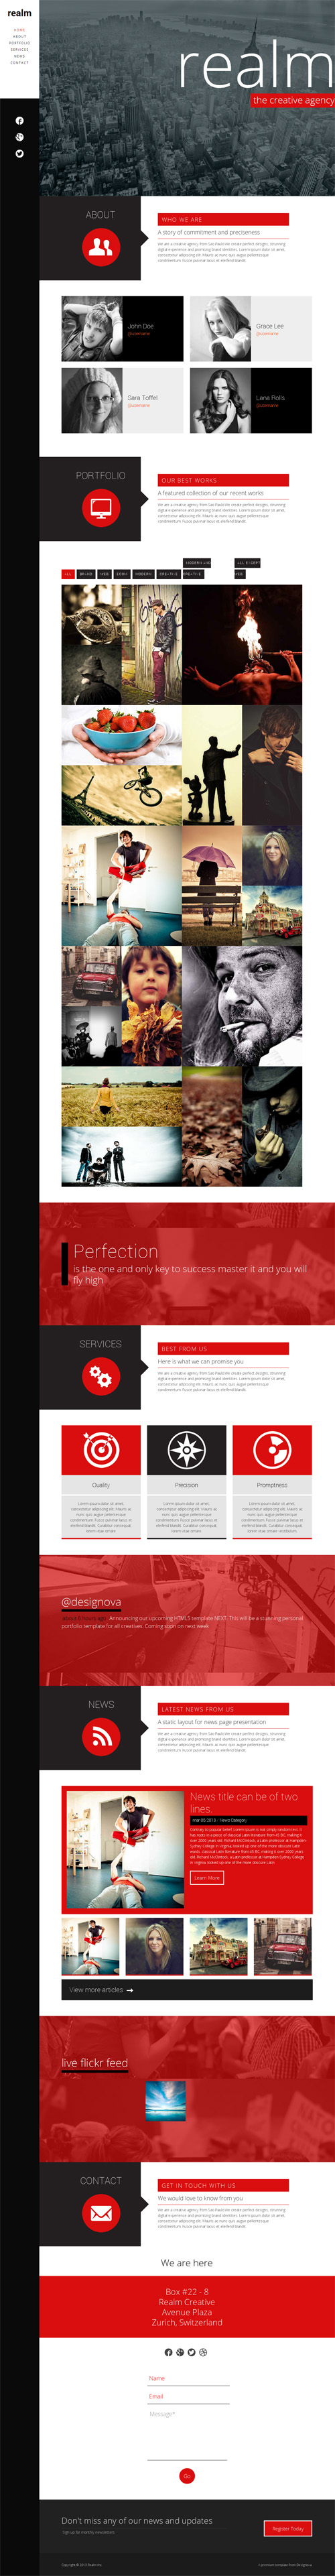 REALM - Unique One Page Parallax Responsive HTML5 Template